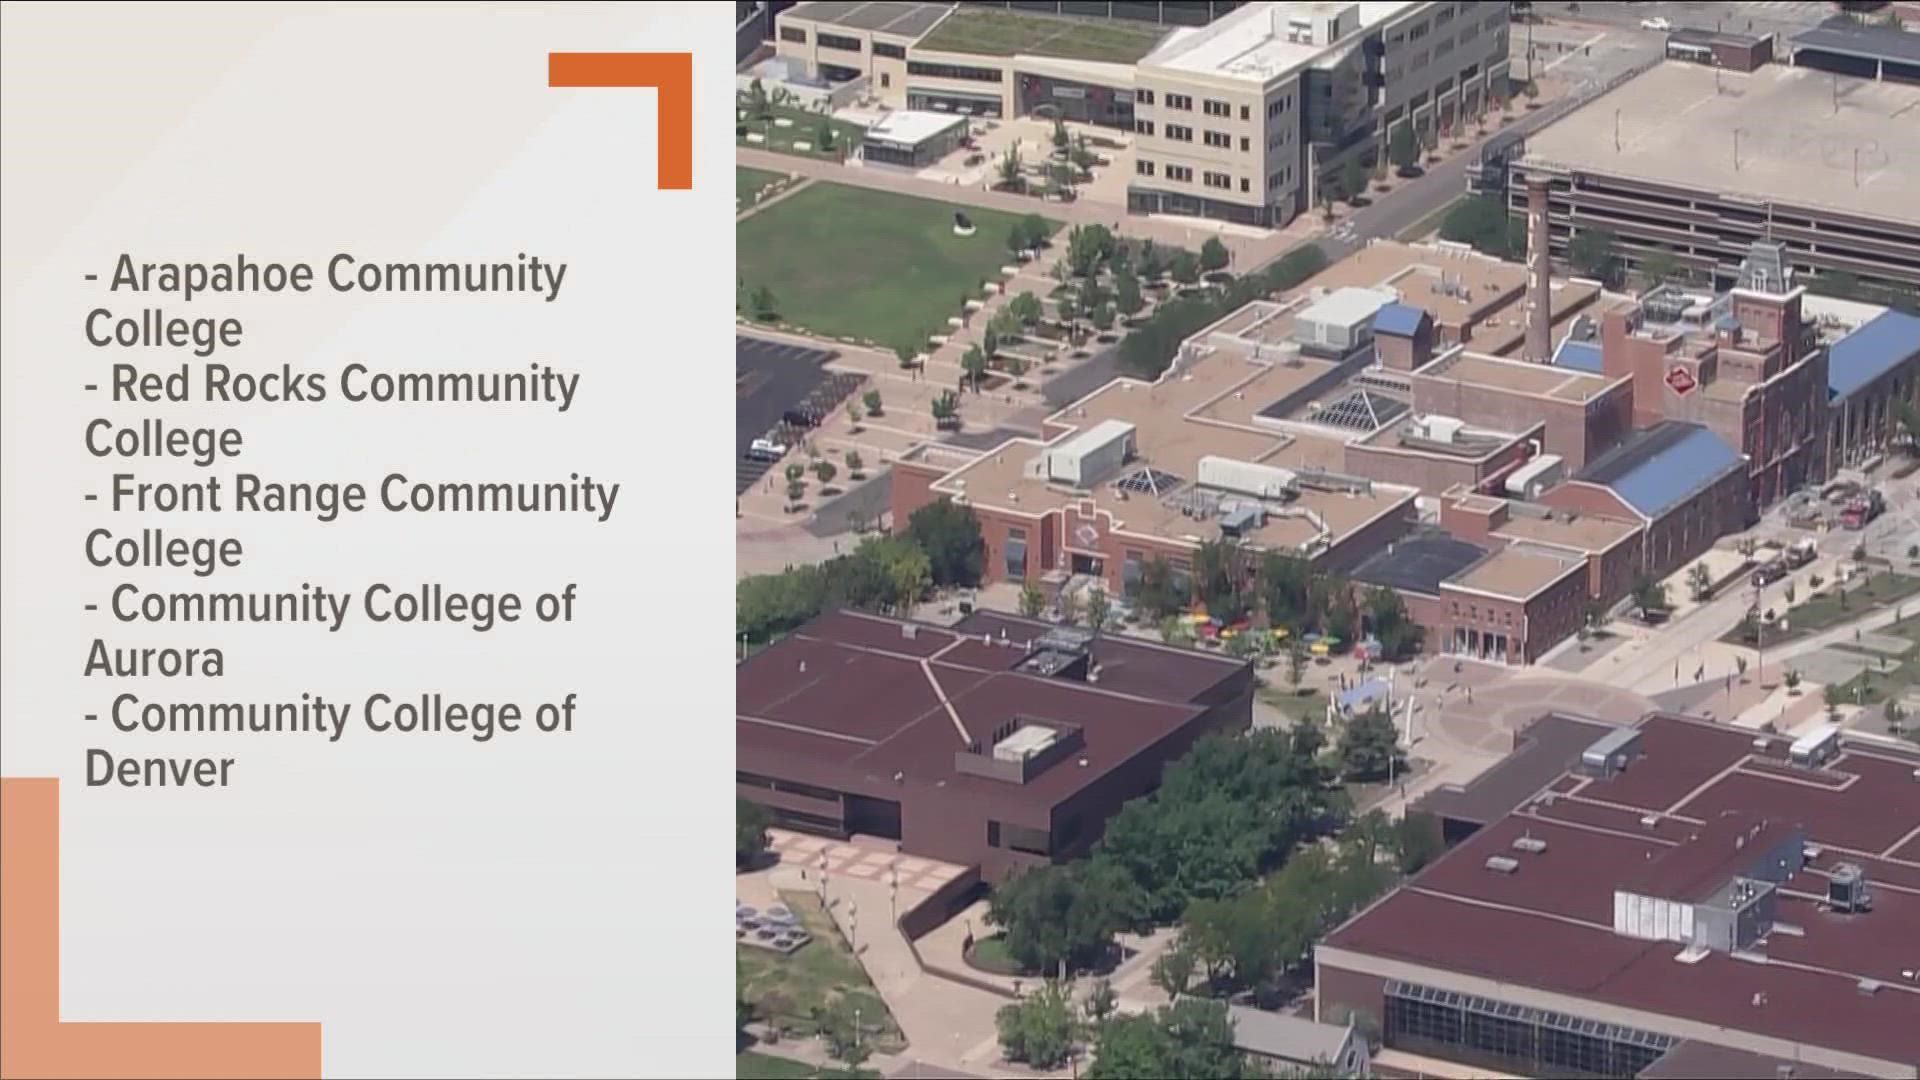 The Auraria Campus asked people to leave, while all the colleges were either closed or on lockout Friday.